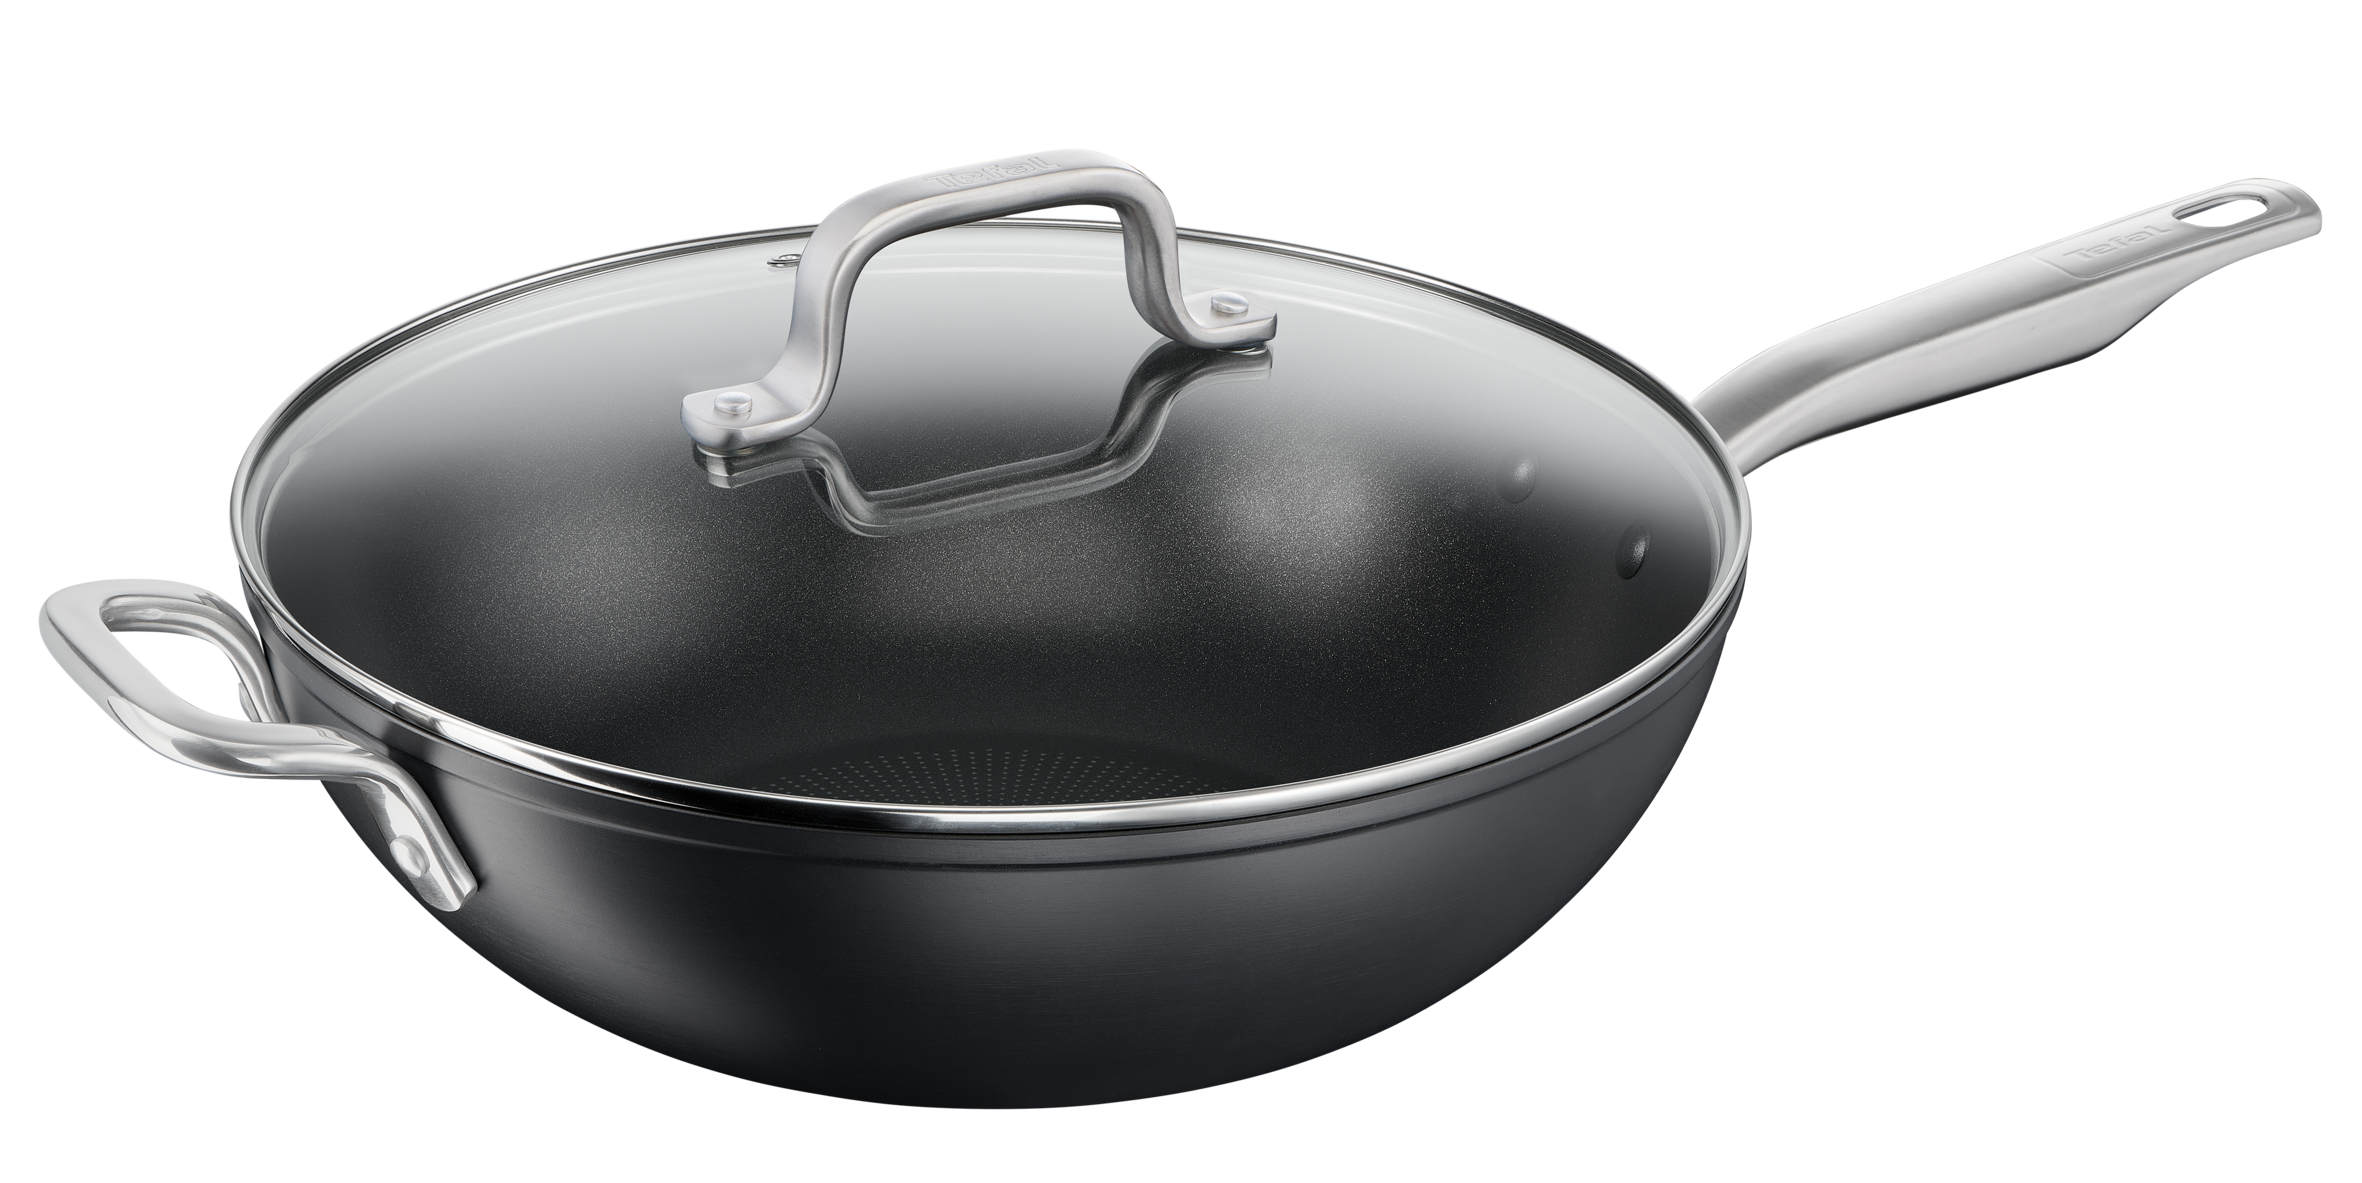 Tefal Premium Specialty Hard Anodised Induction Non-Stick Wok 32cm + Lid